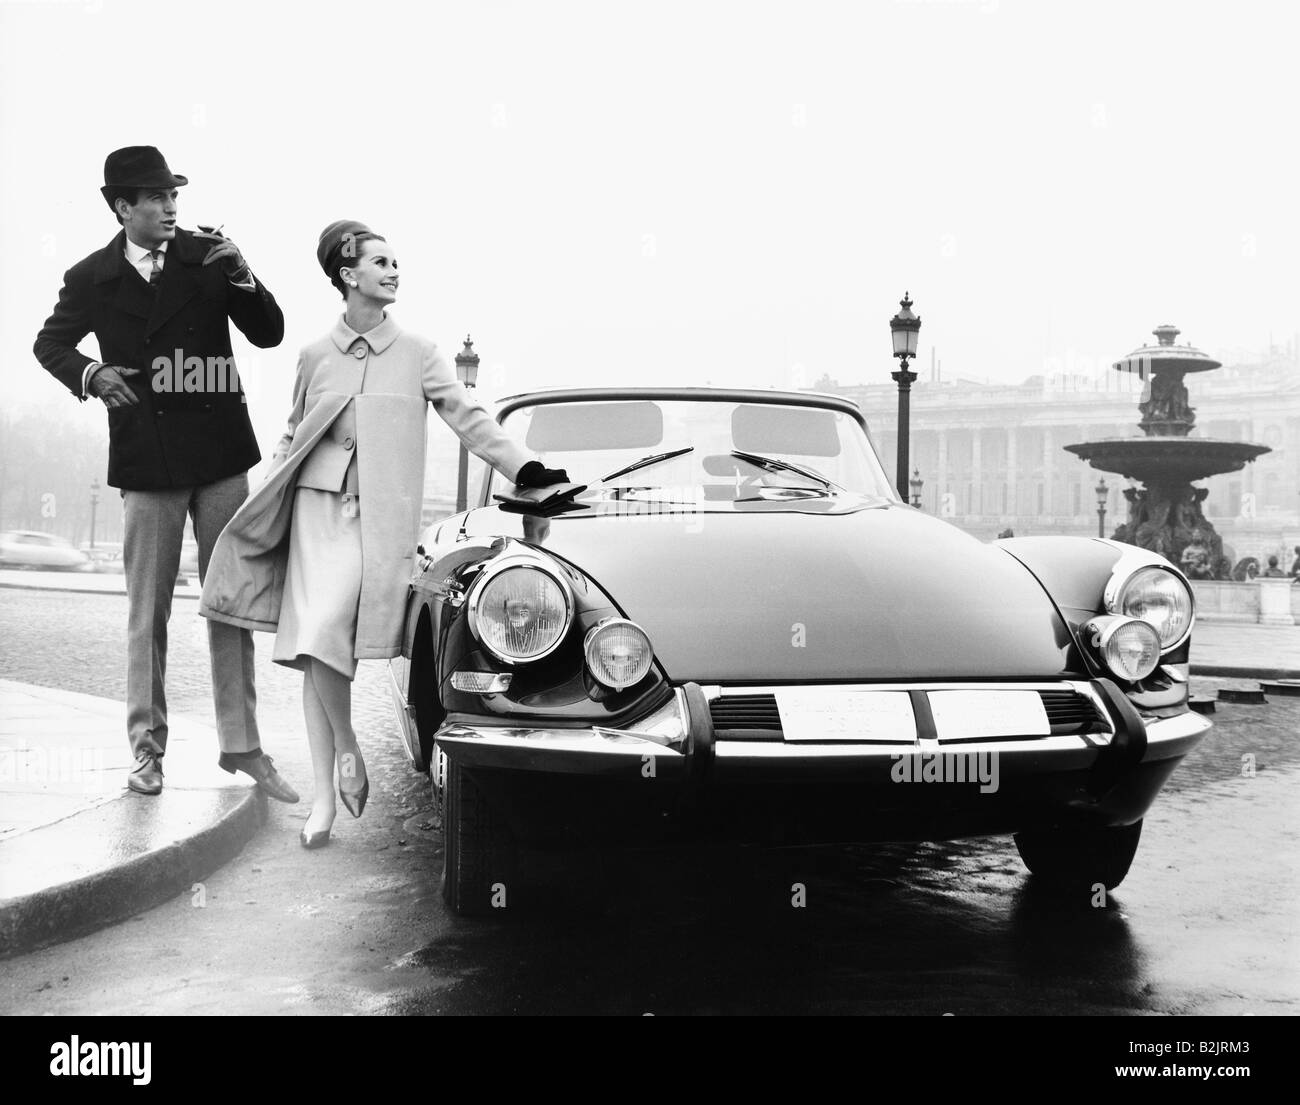 fashion, 1960s, model: Bettina Lauer, Place de la Concorde, Paris, early 1960s, photographer: Rico Puhlmann, Additional-Rights-Clearance-Info-Not-Available Stock Photo